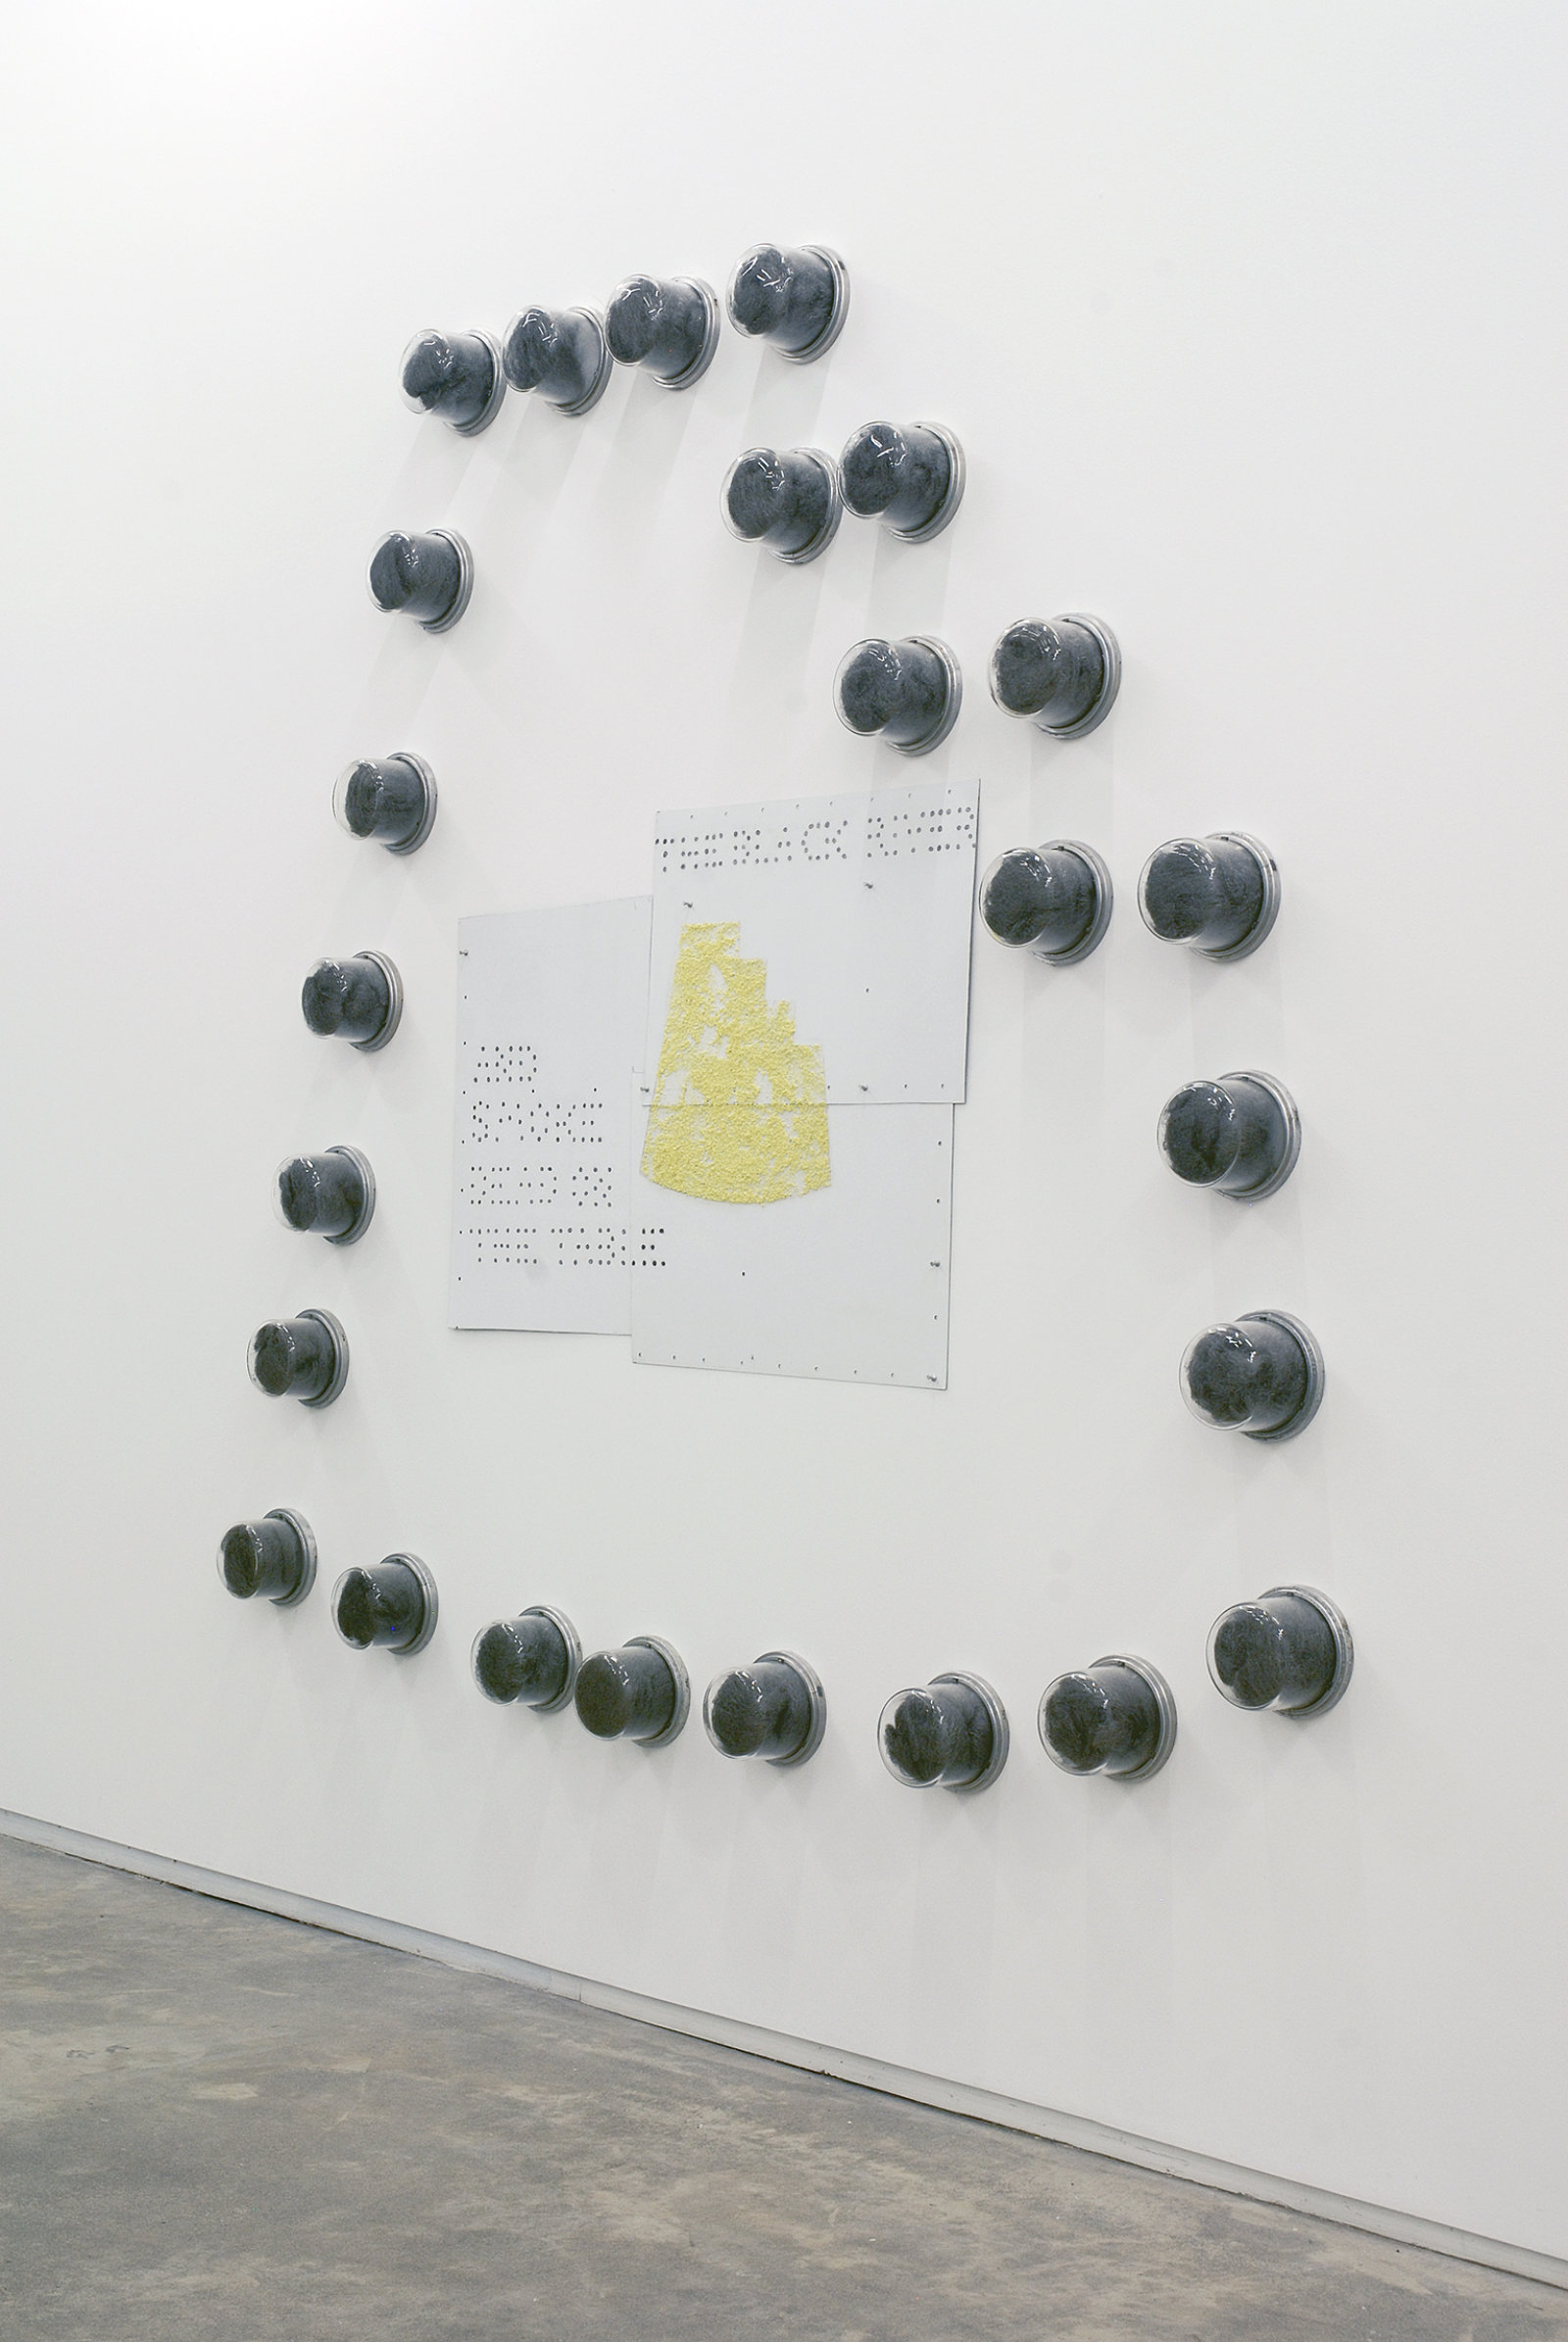 Jerry Pethick, The Last View, 1989, 22 meter covers, steel wool, aluminum, graphite, sulphur, aluminum push-pins, enamelled steel, 106 x 95 x 5 in. (270 x 240 x 12 cm)  